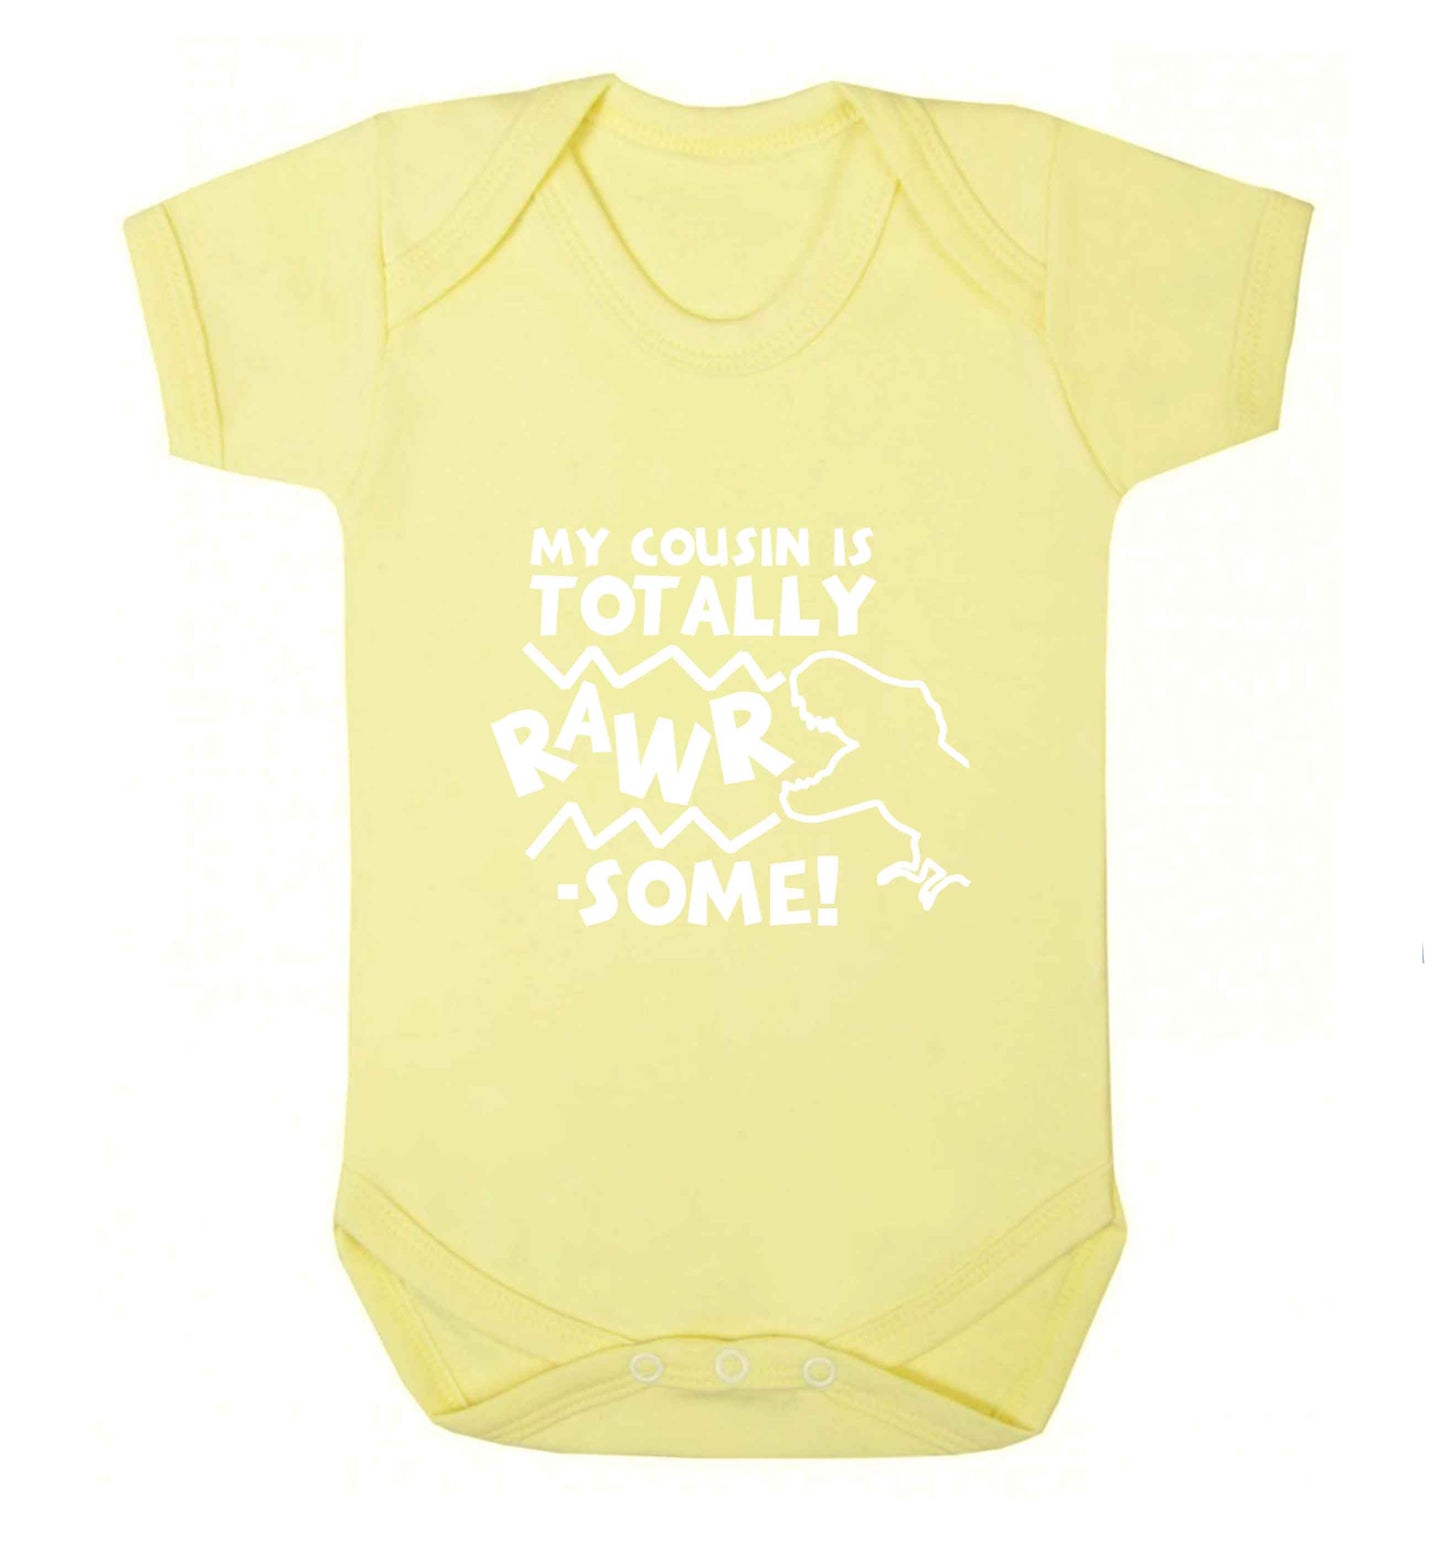 My cousin is totally rawrsome baby vest pale yellow 18-24 months